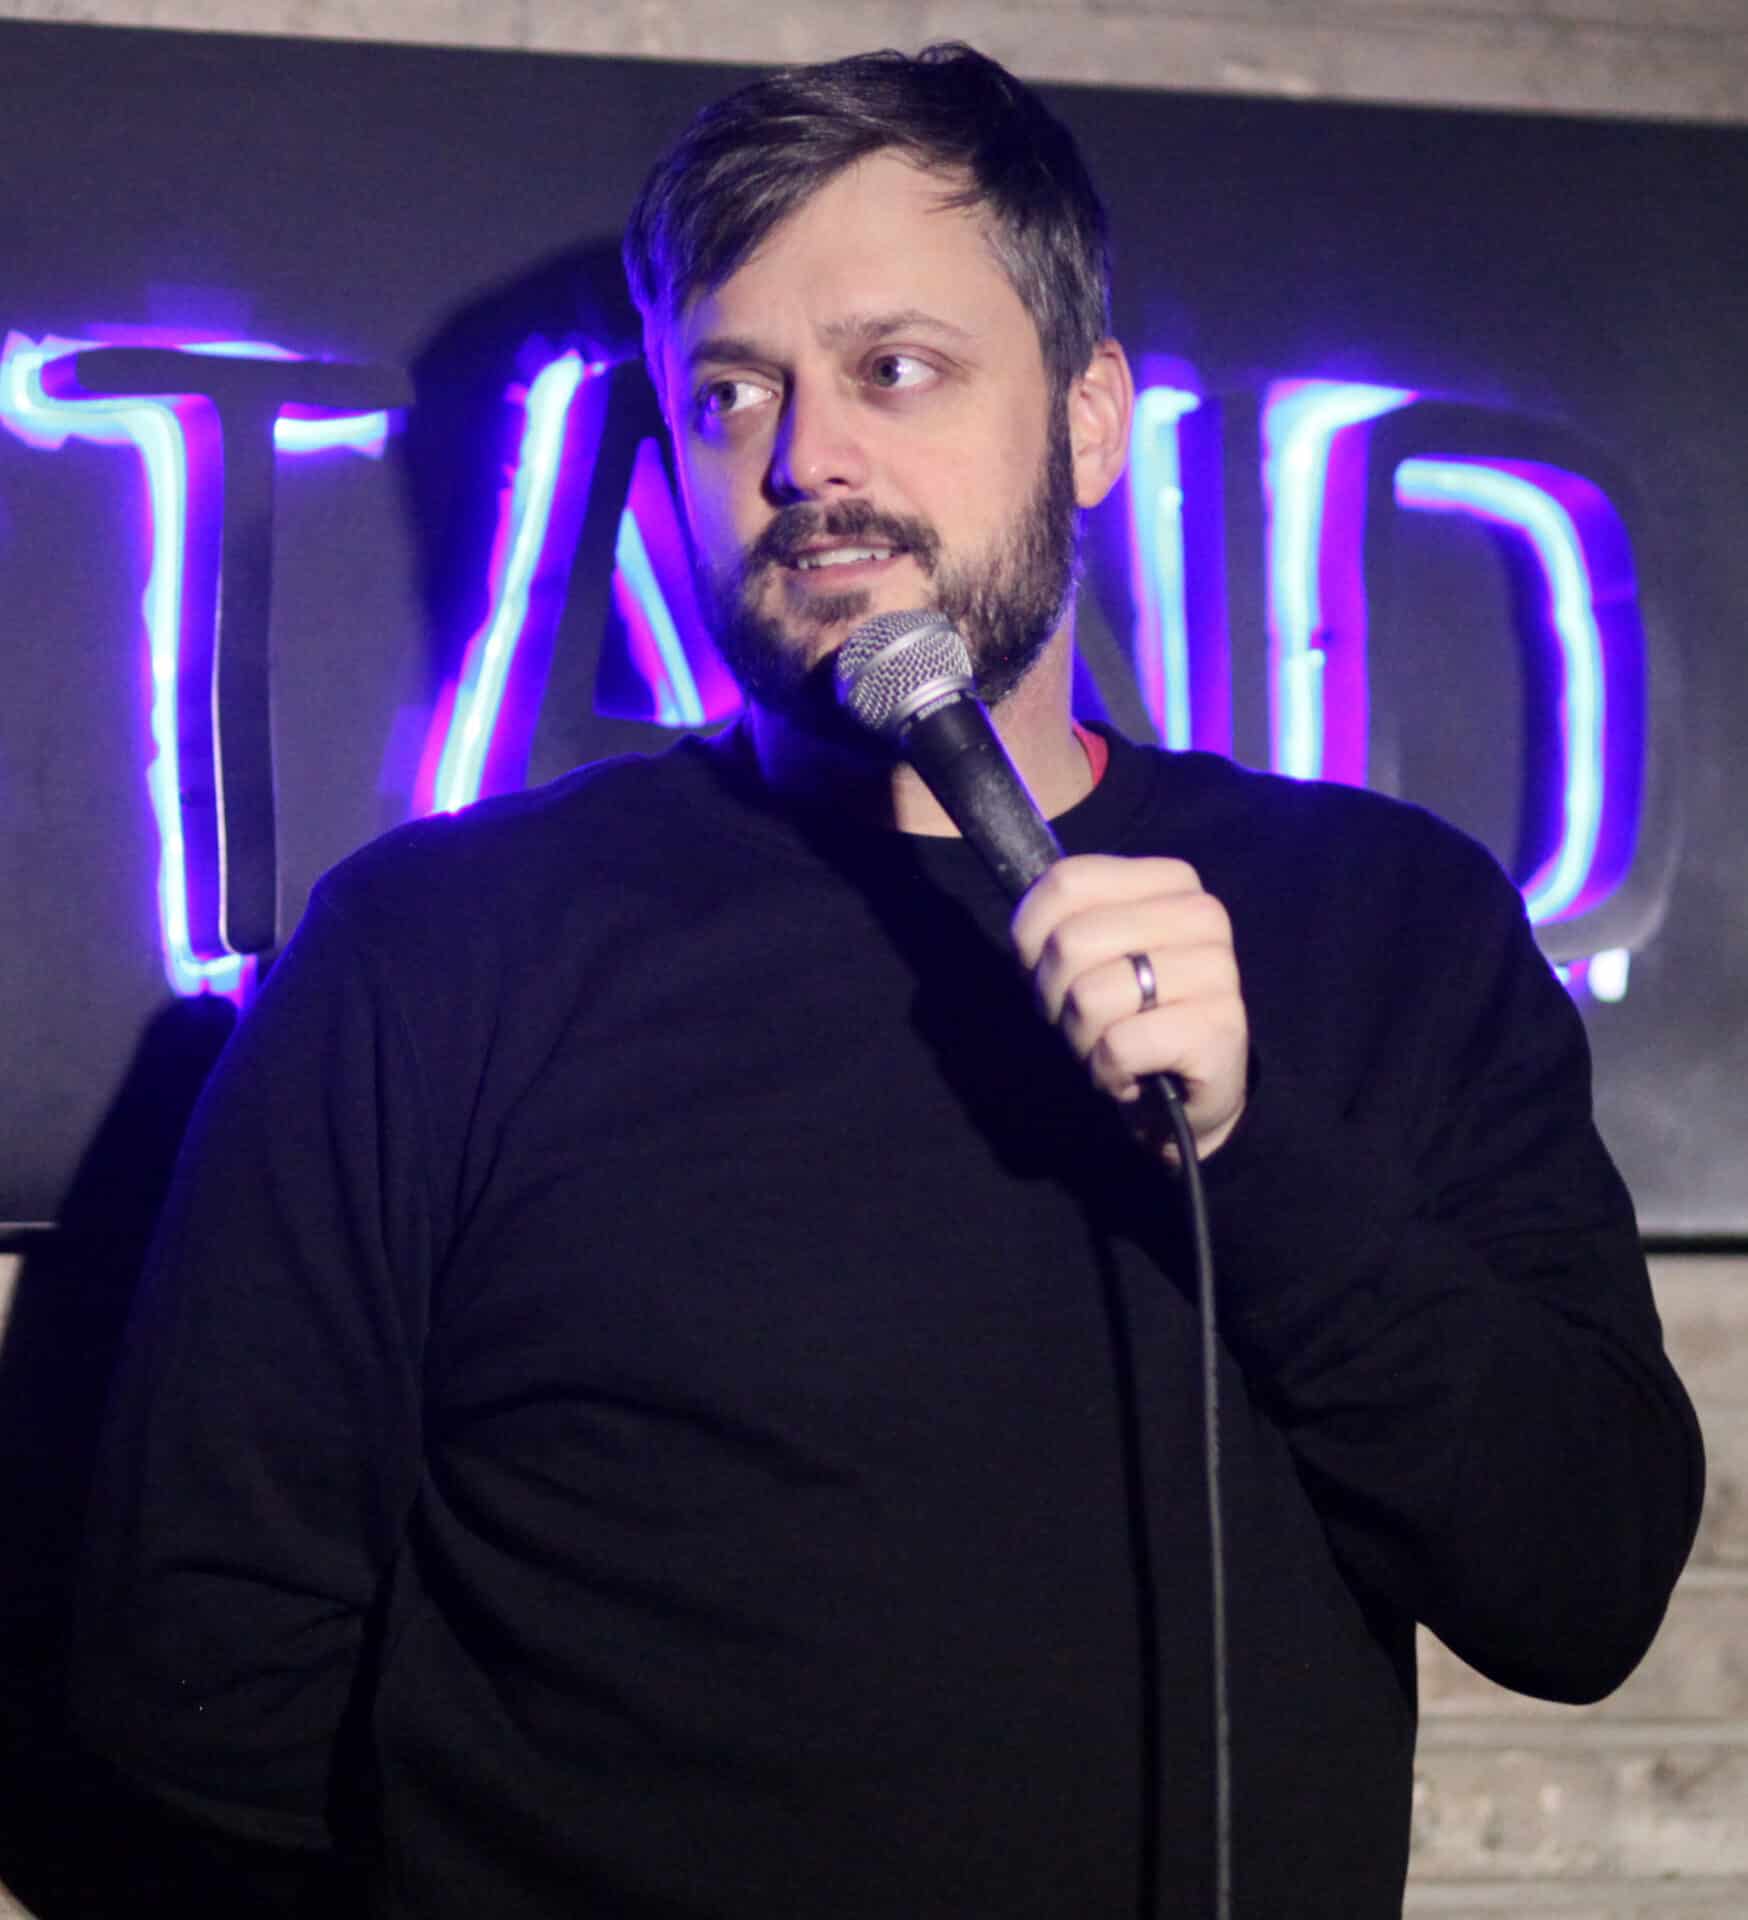 Nate Bargatze in a stand-up comedy performance